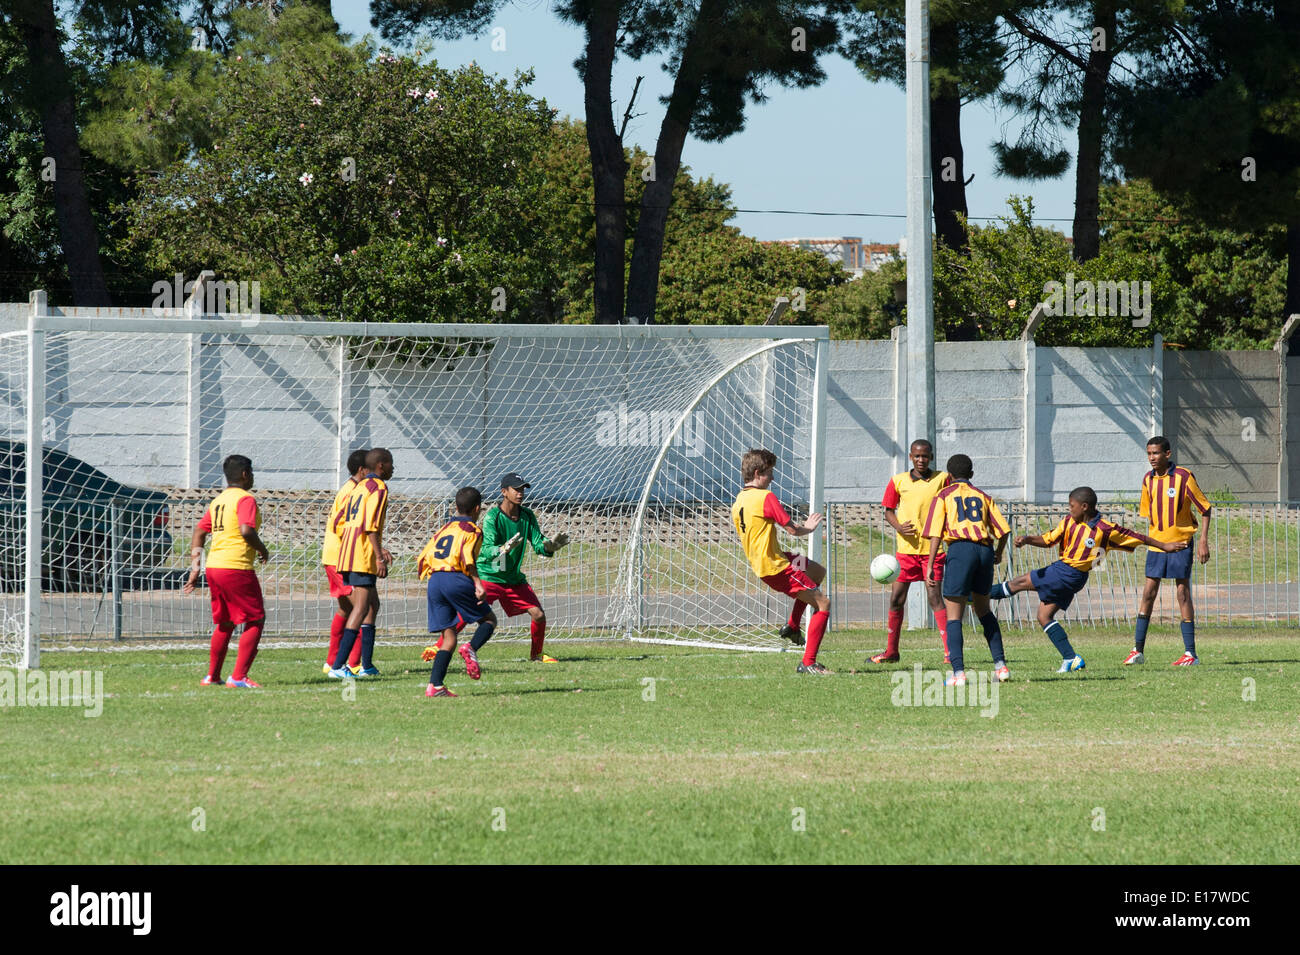 Goalkeeper trying to catch a shot on goal other football players watching, Cape Town, South Africa Stock Photo